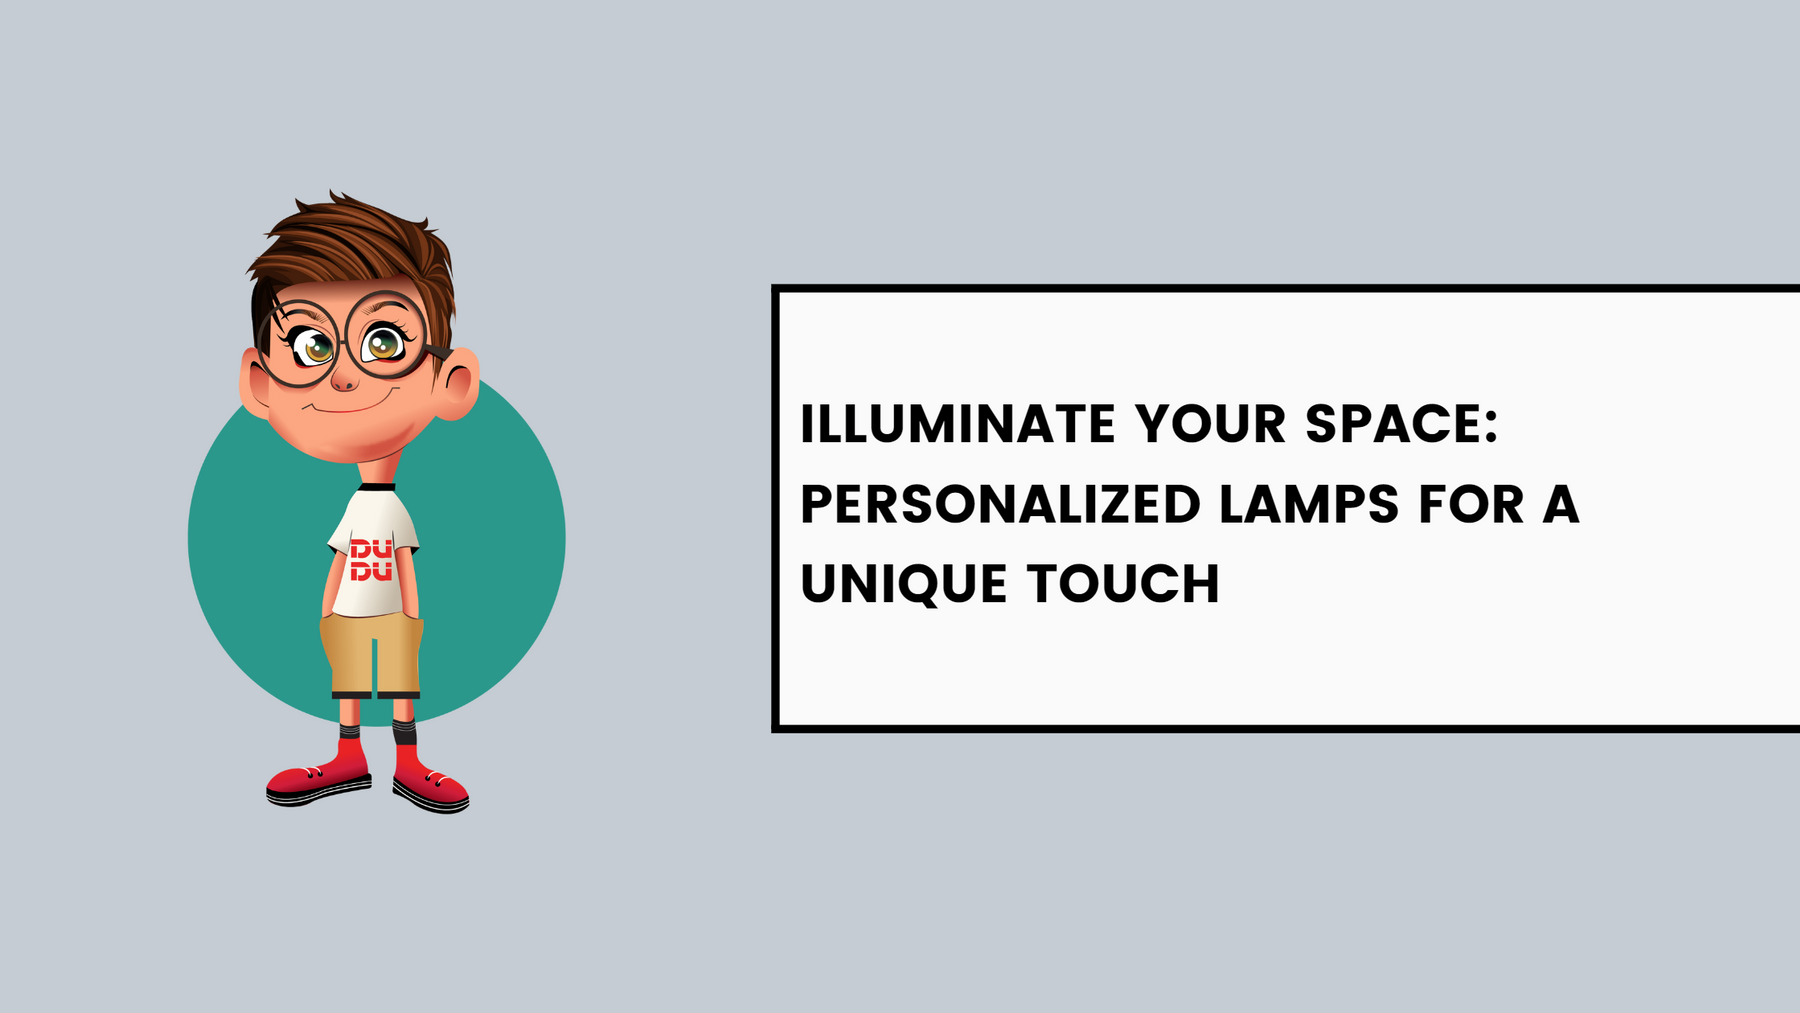 Illuminate Your Space: Personalized Lamps for a Unique Touch